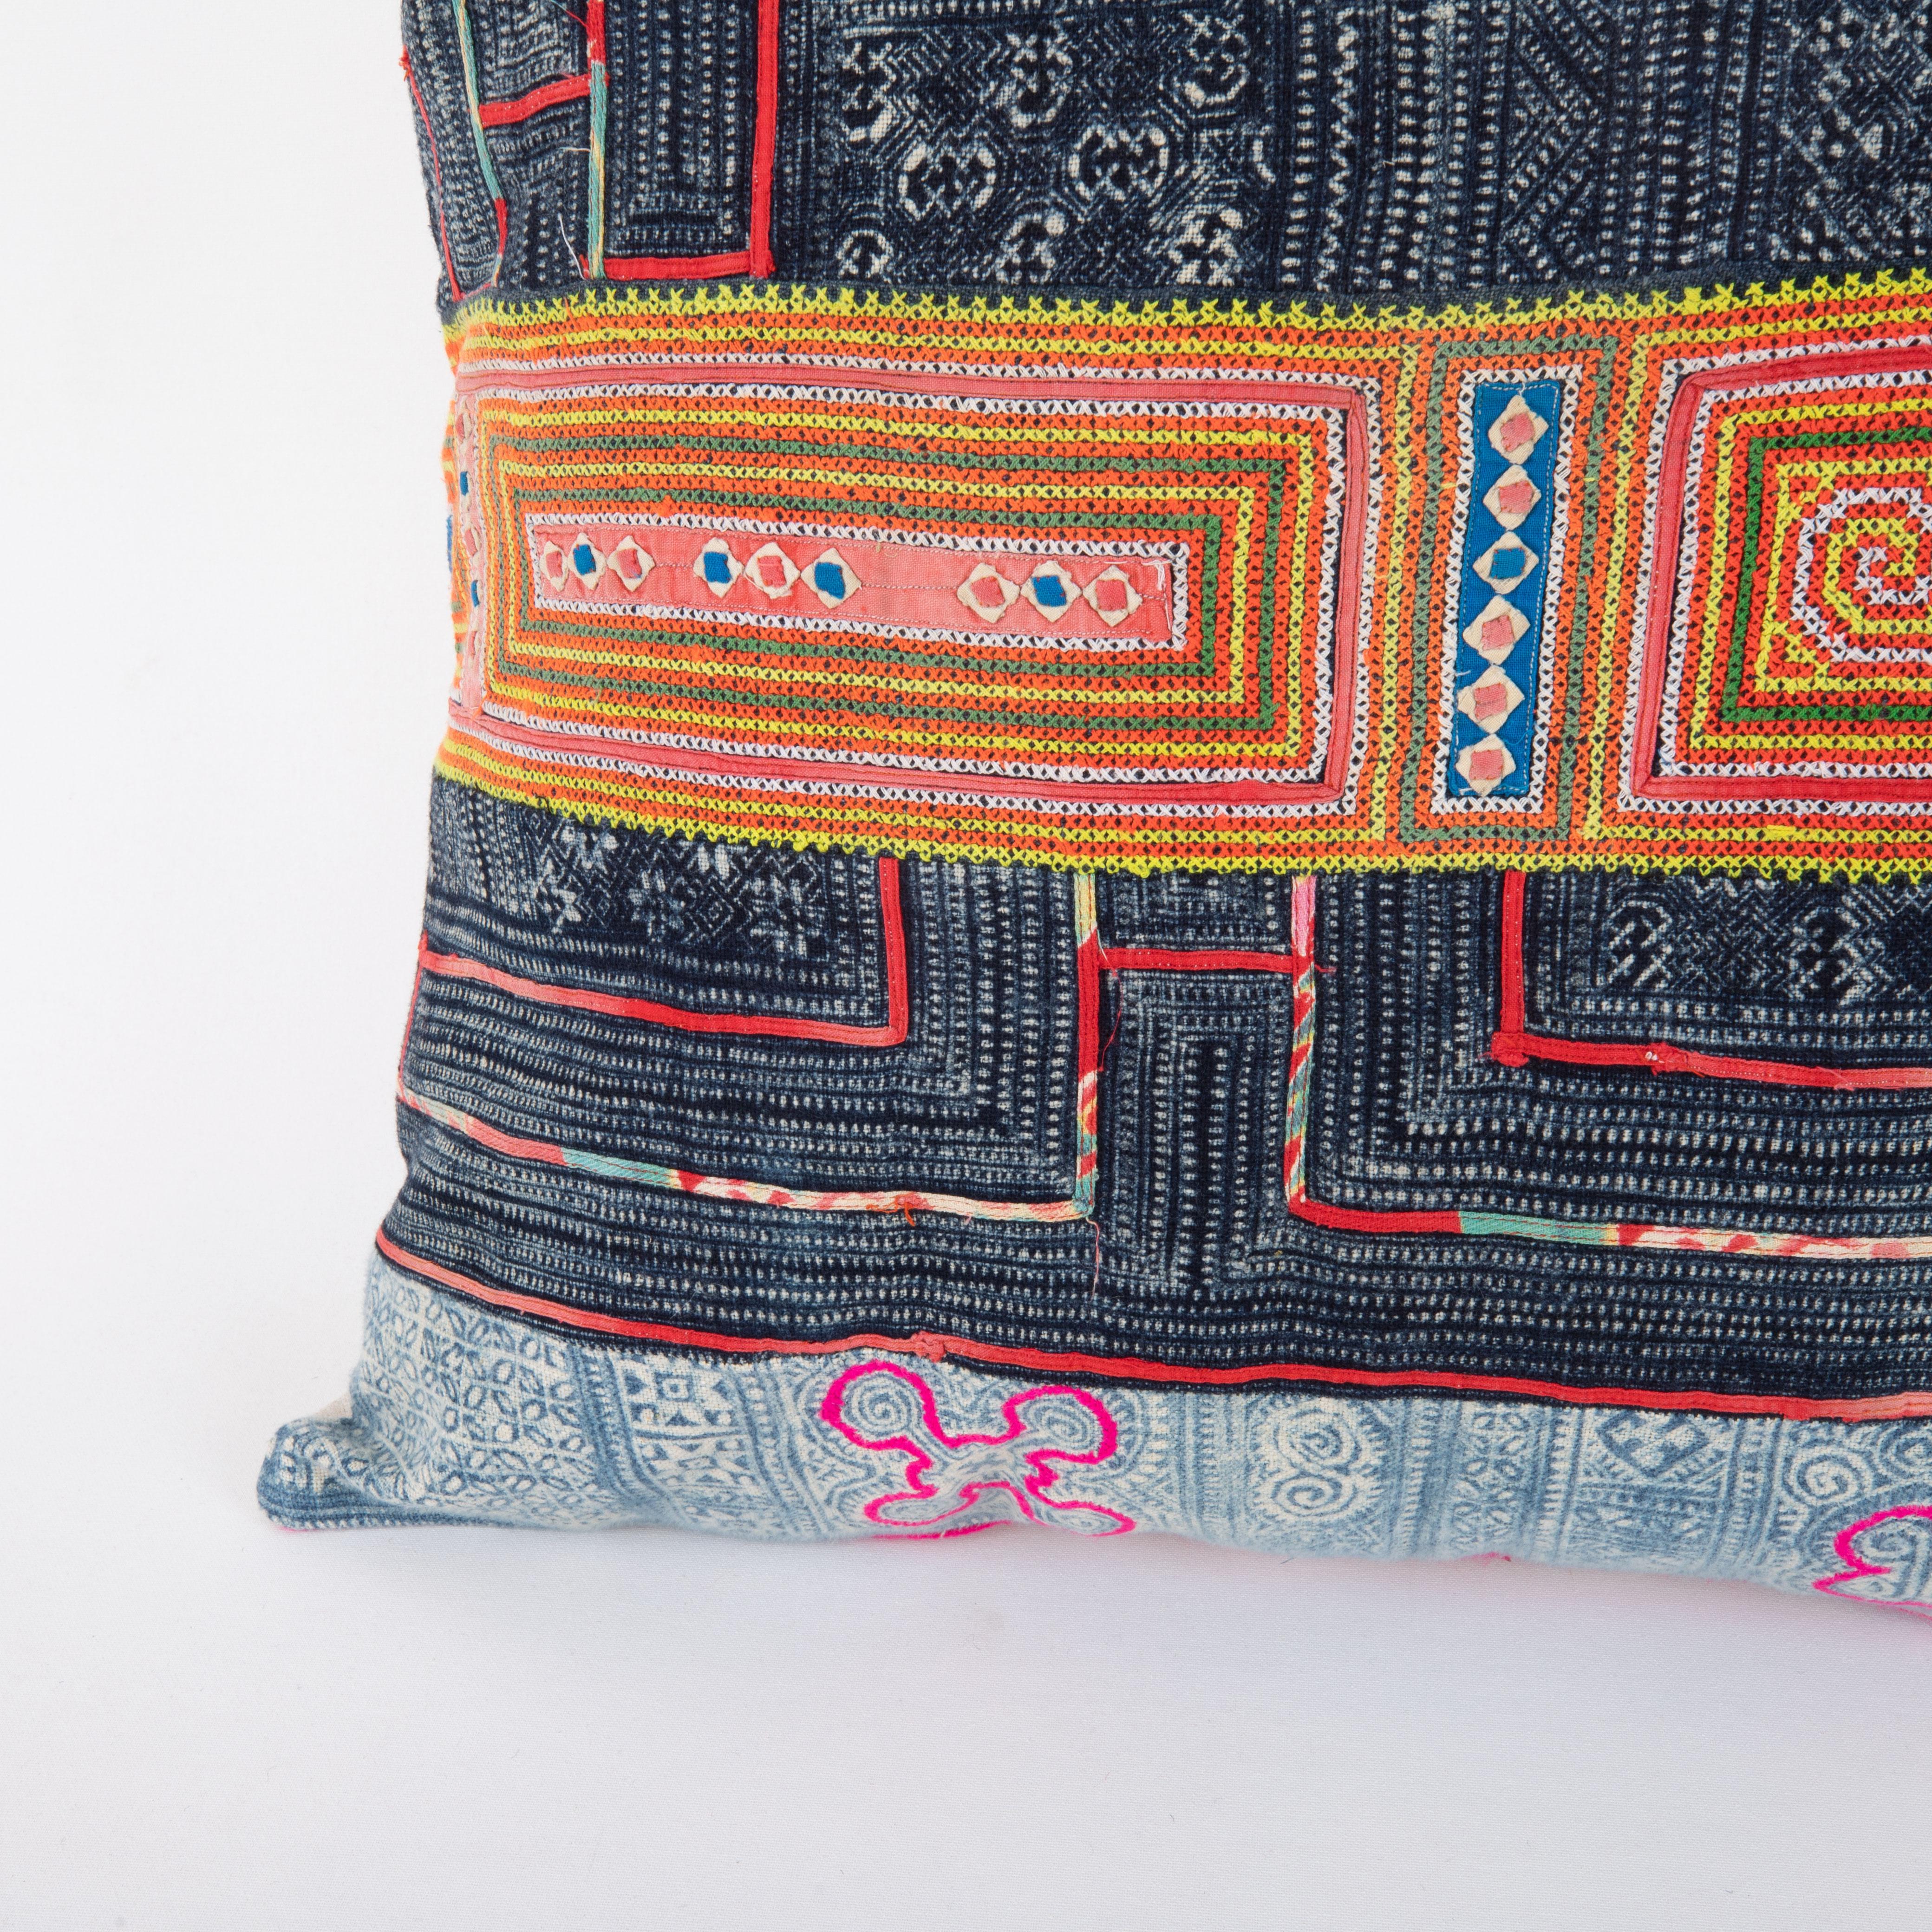 20th Century Pillow Case Made from Hmong Hill Tribe Batik Textile Mid 20th C For Sale